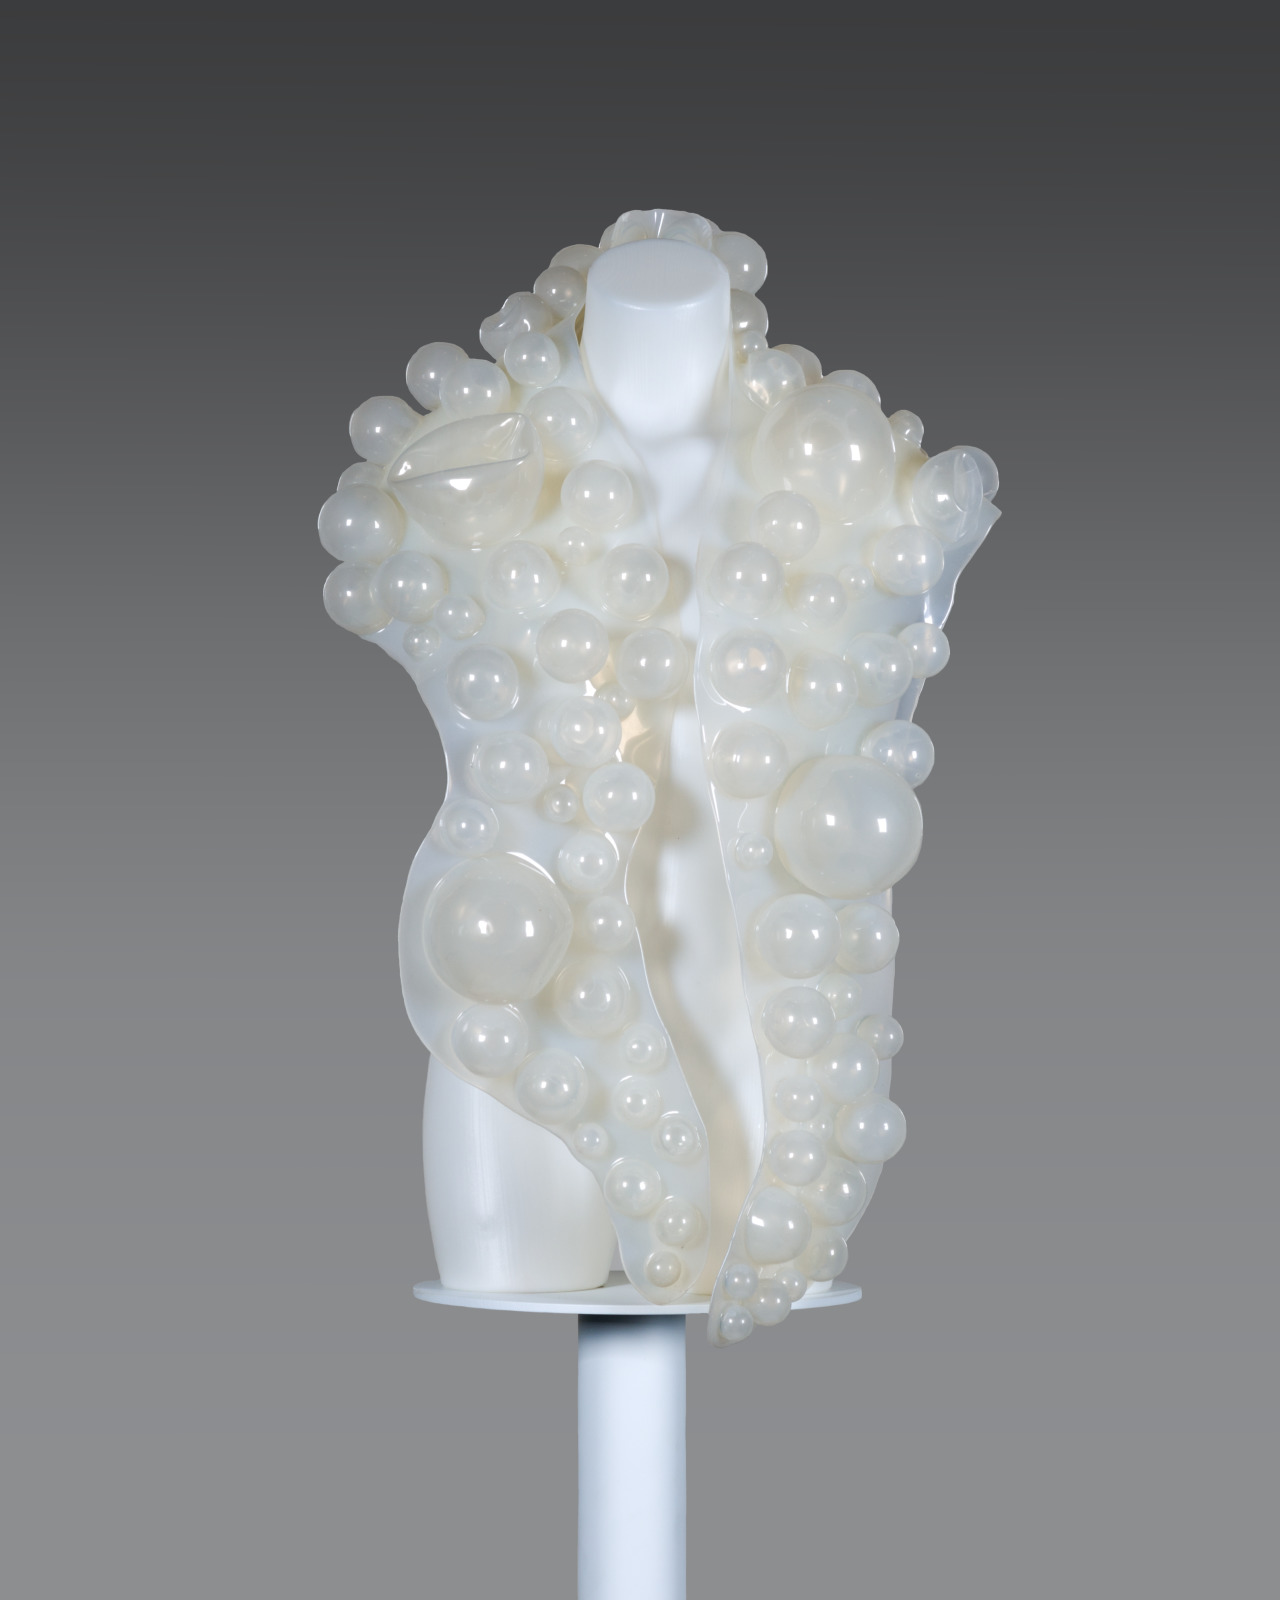 A mannequin torso draped in an opaque silicone shaw with opaque balls of varying sizes adhered to it